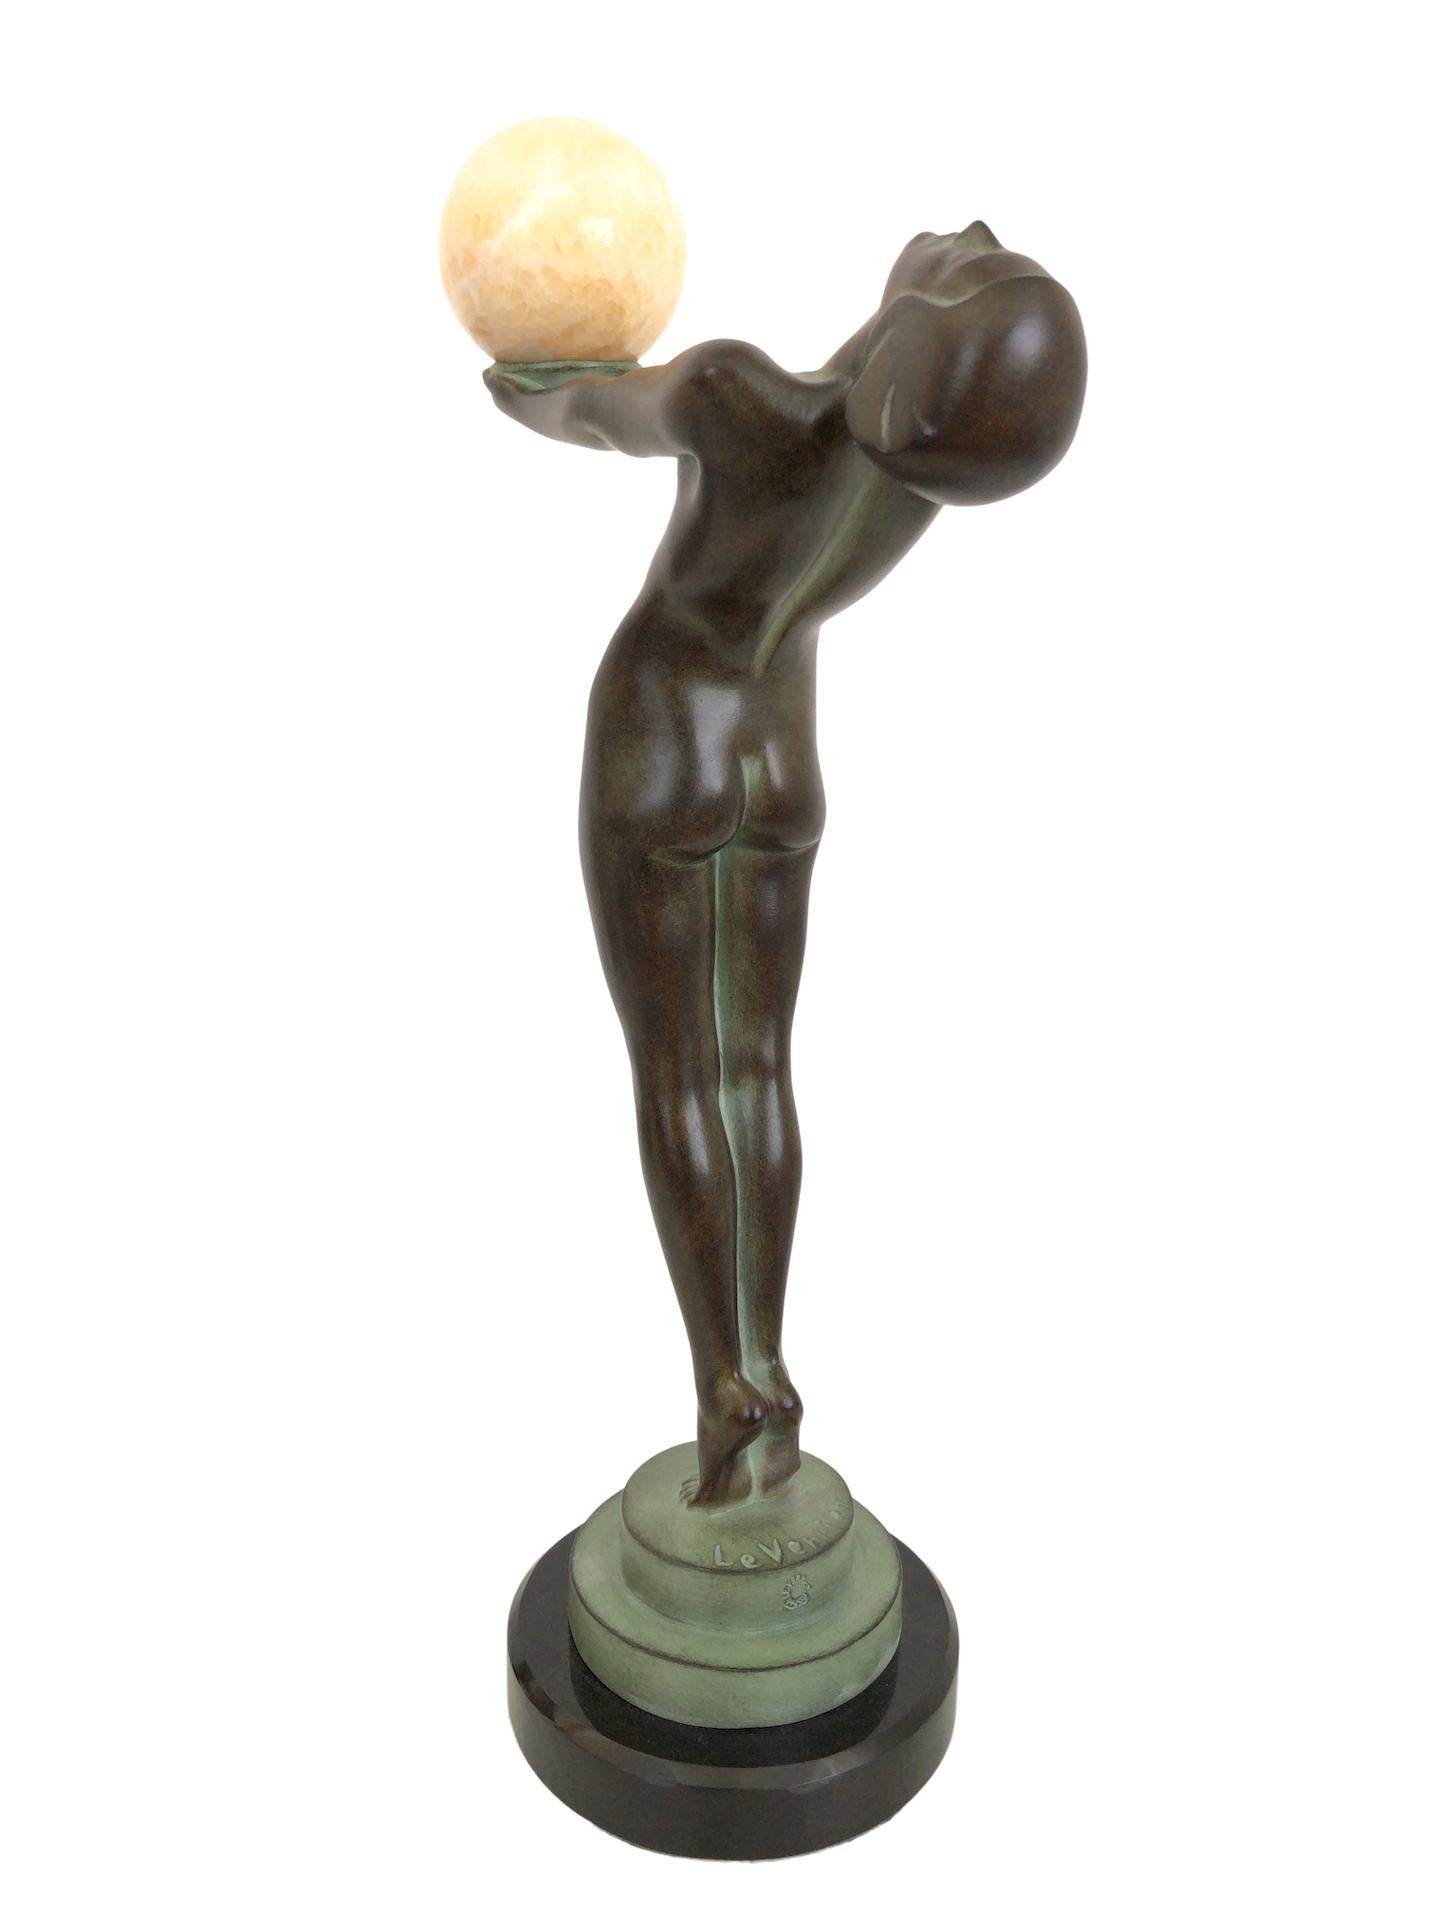 Spelter French Art Deco Dancer Sculpture Leuer with Onyx Ball Original Max Le Verrier